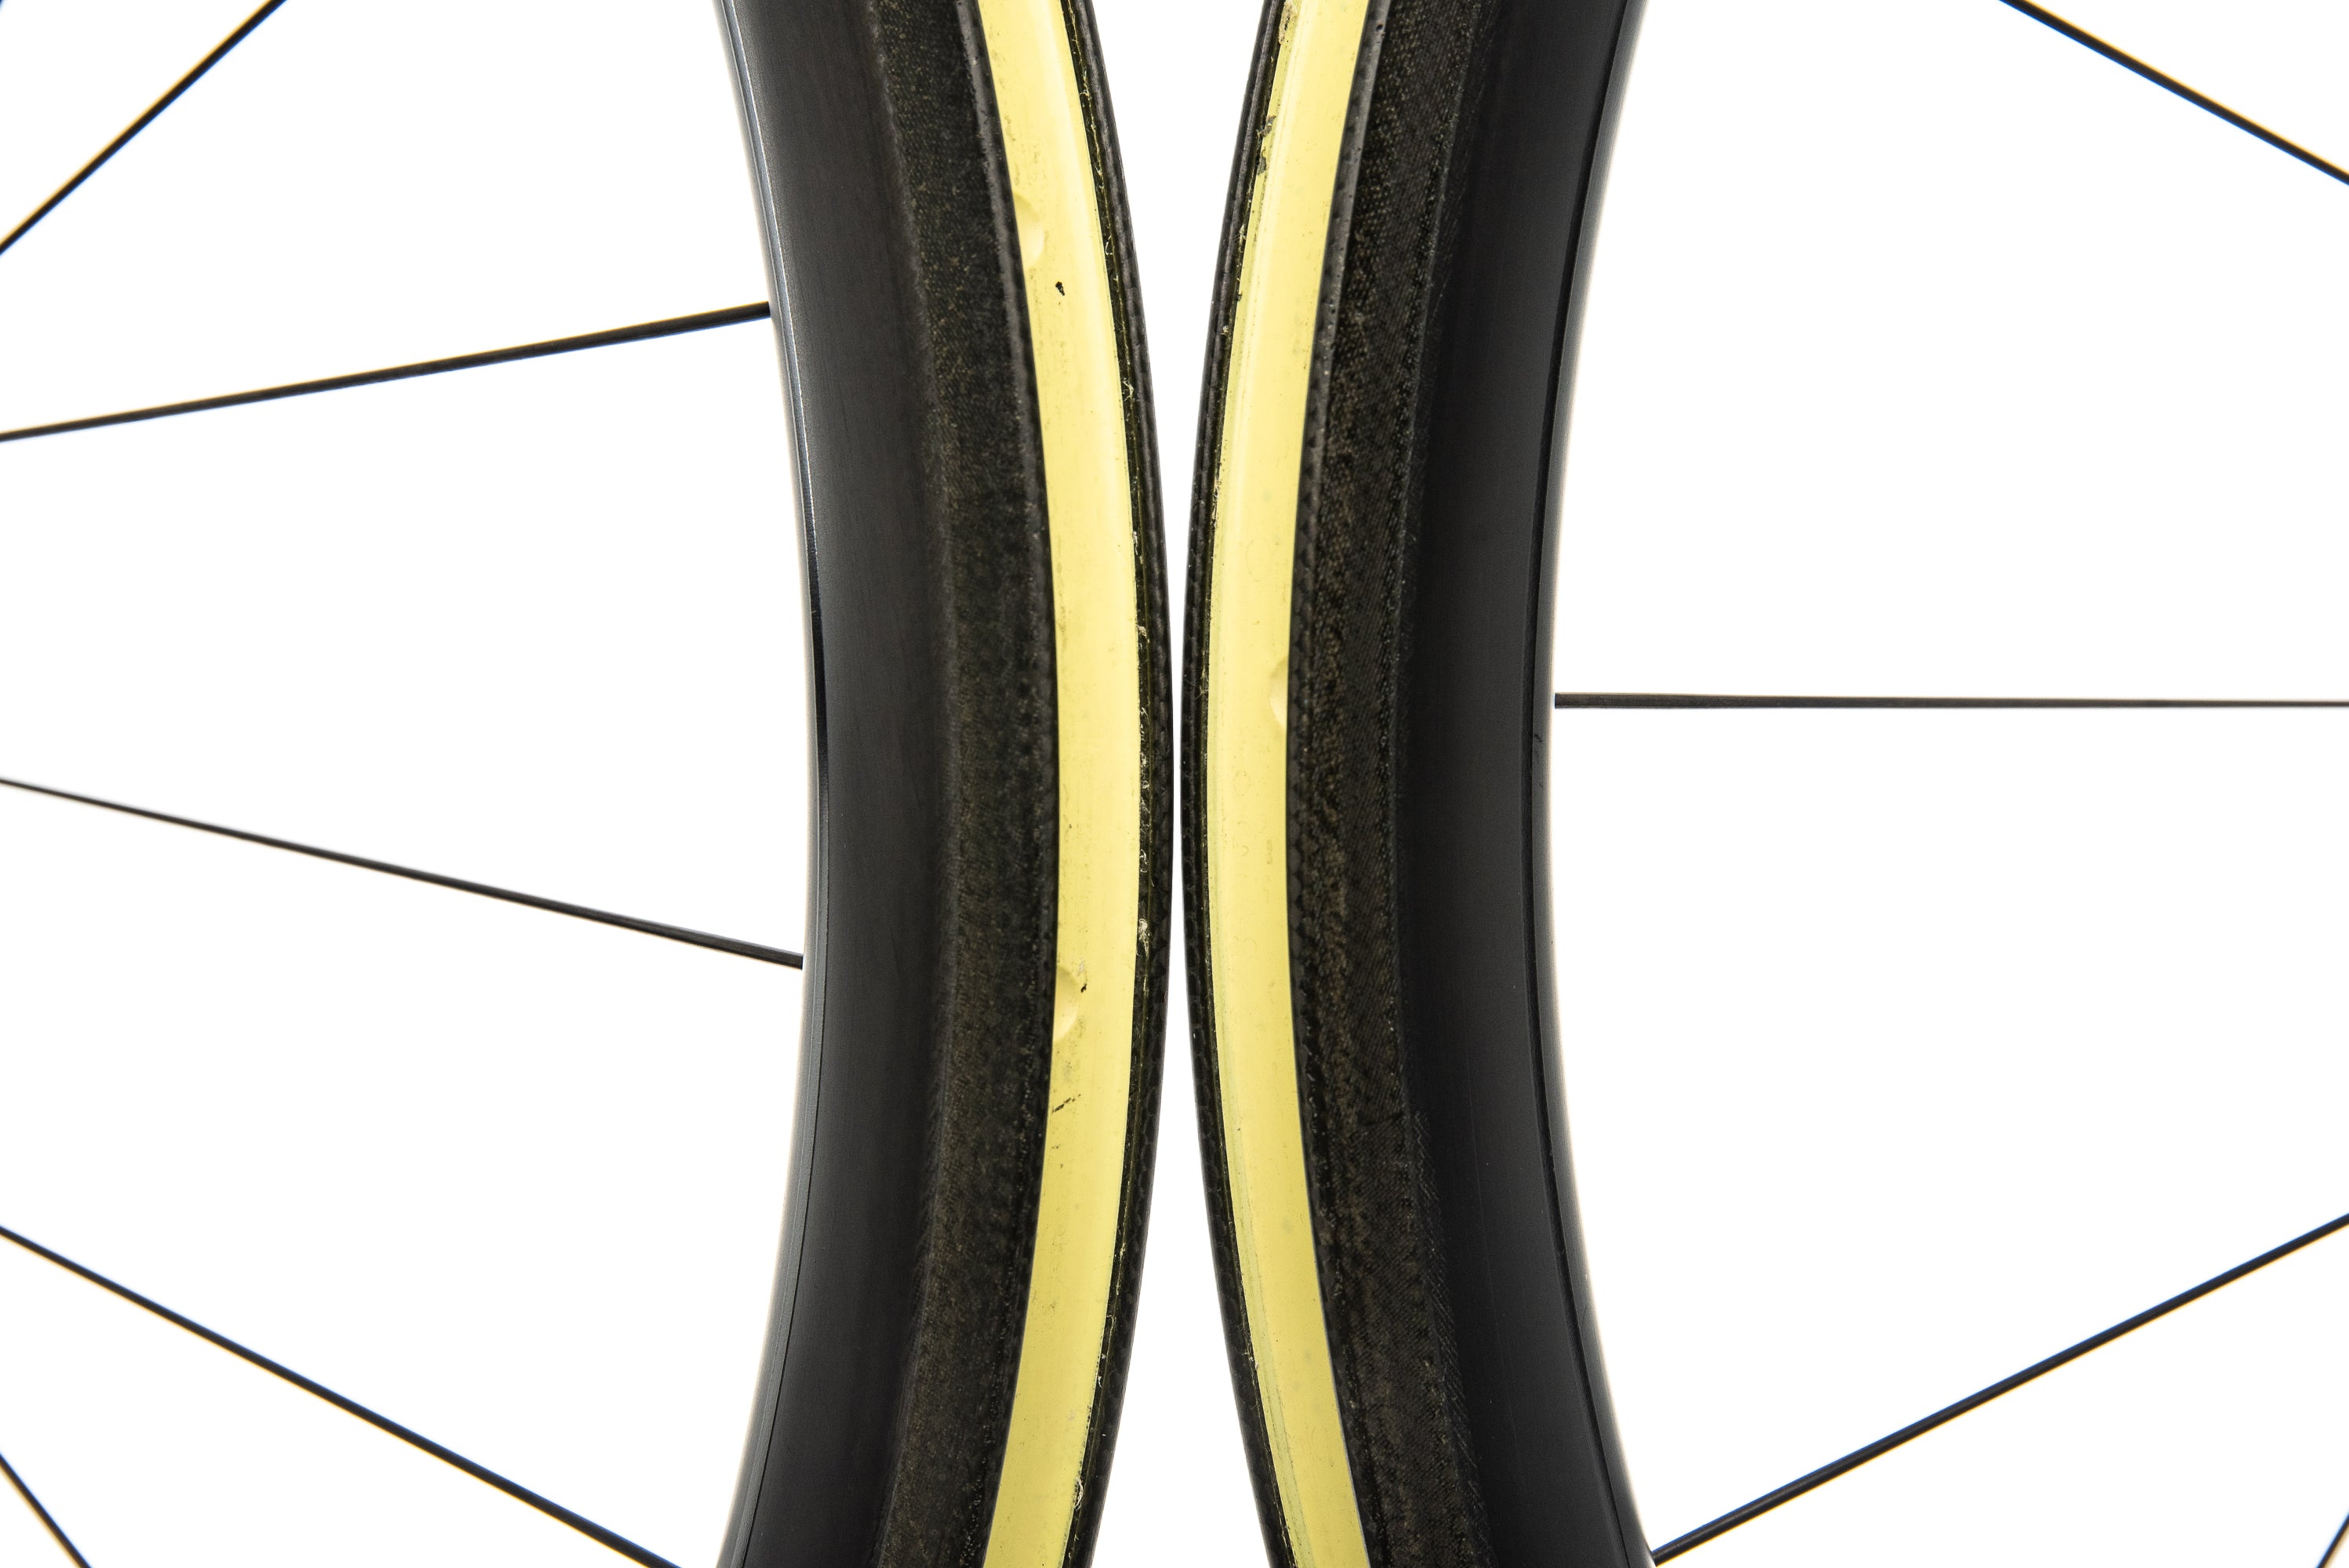 Roval CL40 Rapide Carbon Tubeless 700c Wheelset front wheel